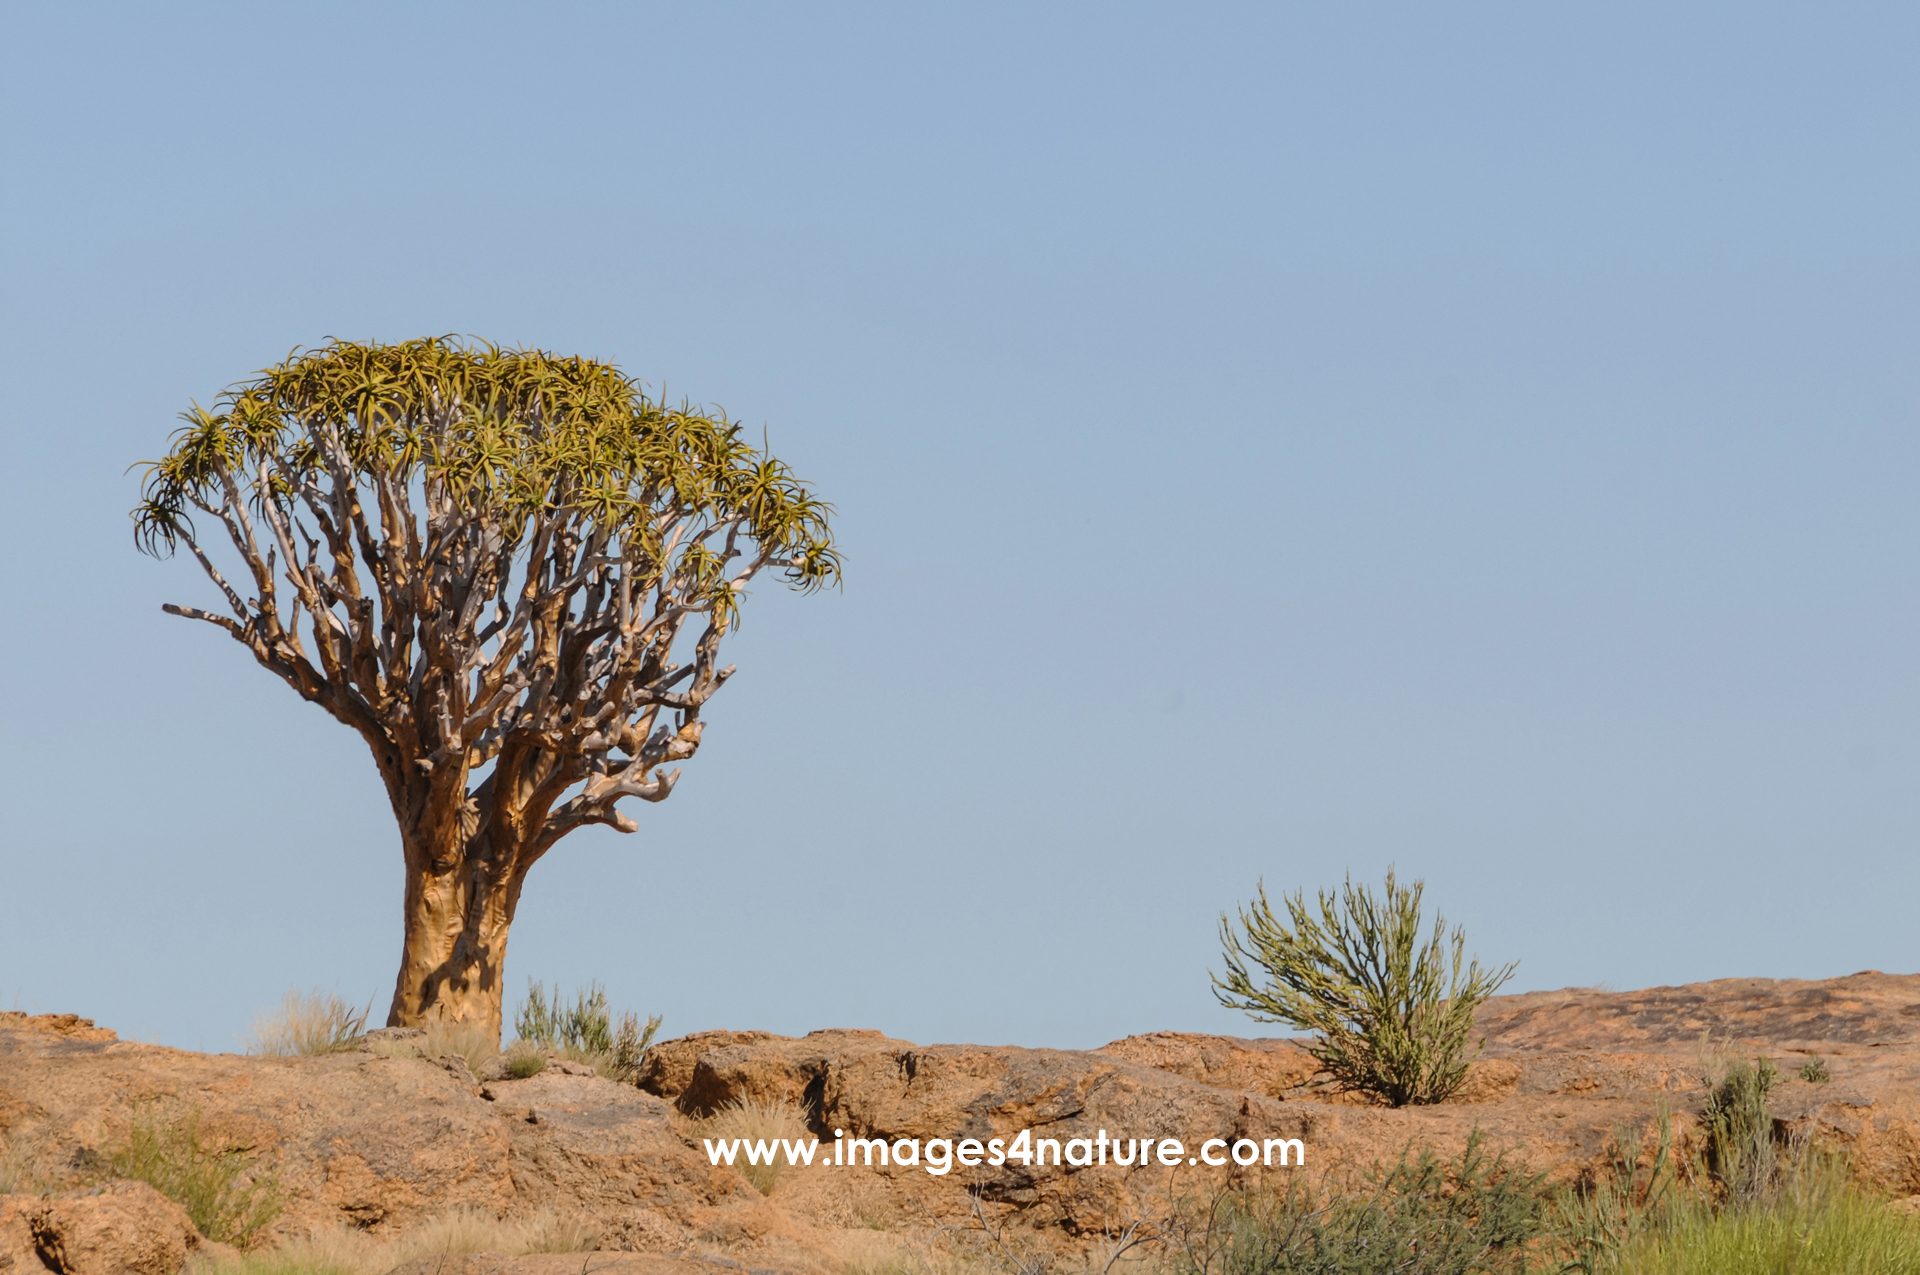 One single quiver tree in arid landscape against blue sky